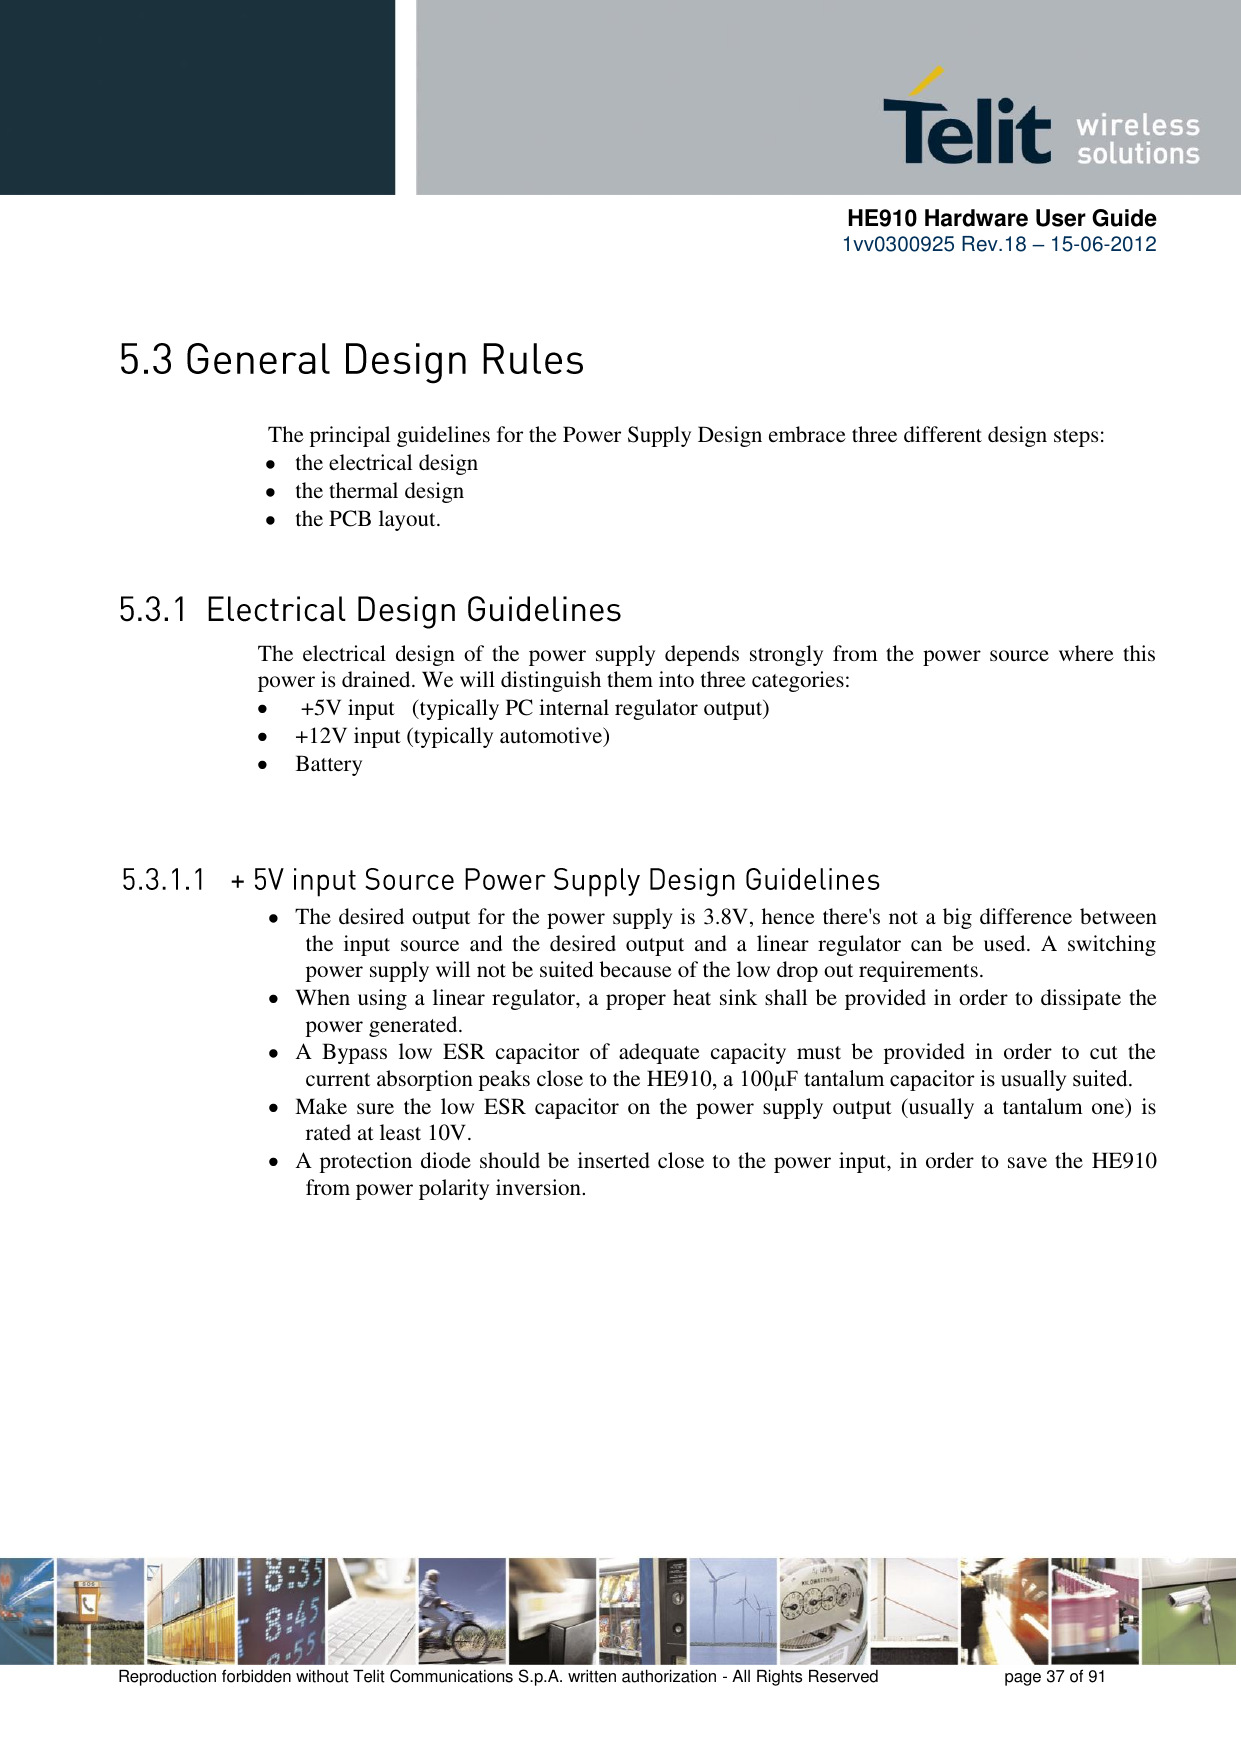      HE910 Hardware User Guide 1vv0300925 Rev.18 – 15-06-2012    Reproduction forbidden without Telit Communications S.p.A. written authorization - All Rights Reserved    page 37 of 91    The principal guidelines for the Power Supply Design embrace three different design steps:  the electrical design  the thermal design  the PCB layout.  The electrical design of the power supply depends strongly from the power source where this power is drained. We will distinguish them into three categories:   +5V input   (typically PC internal regulator output)  +12V input (typically automotive)  Battery   The desired output for the power supply is 3.8V, hence there&apos;s not a big difference between the  input  source  and  the  desired  output  and  a  linear  regulator  can  be  used.  A  switching power supply will not be suited because of the low drop out requirements.  When using a linear regulator, a proper heat sink shall be provided in order to dissipate the power generated.  A  Bypass  low  ESR  capacitor  of  adequate  capacity  must  be  provided  in  order  to  cut  the current absorption peaks close to the HE910, a 100μF tantalum capacitor is usually suited.  Make sure  the low ESR capacitor on the power supply output (usually a  tantalum one) is rated at least 10V.  A protection diode should be inserted close to the power input, in order to save the HE910 from power polarity inversion. 